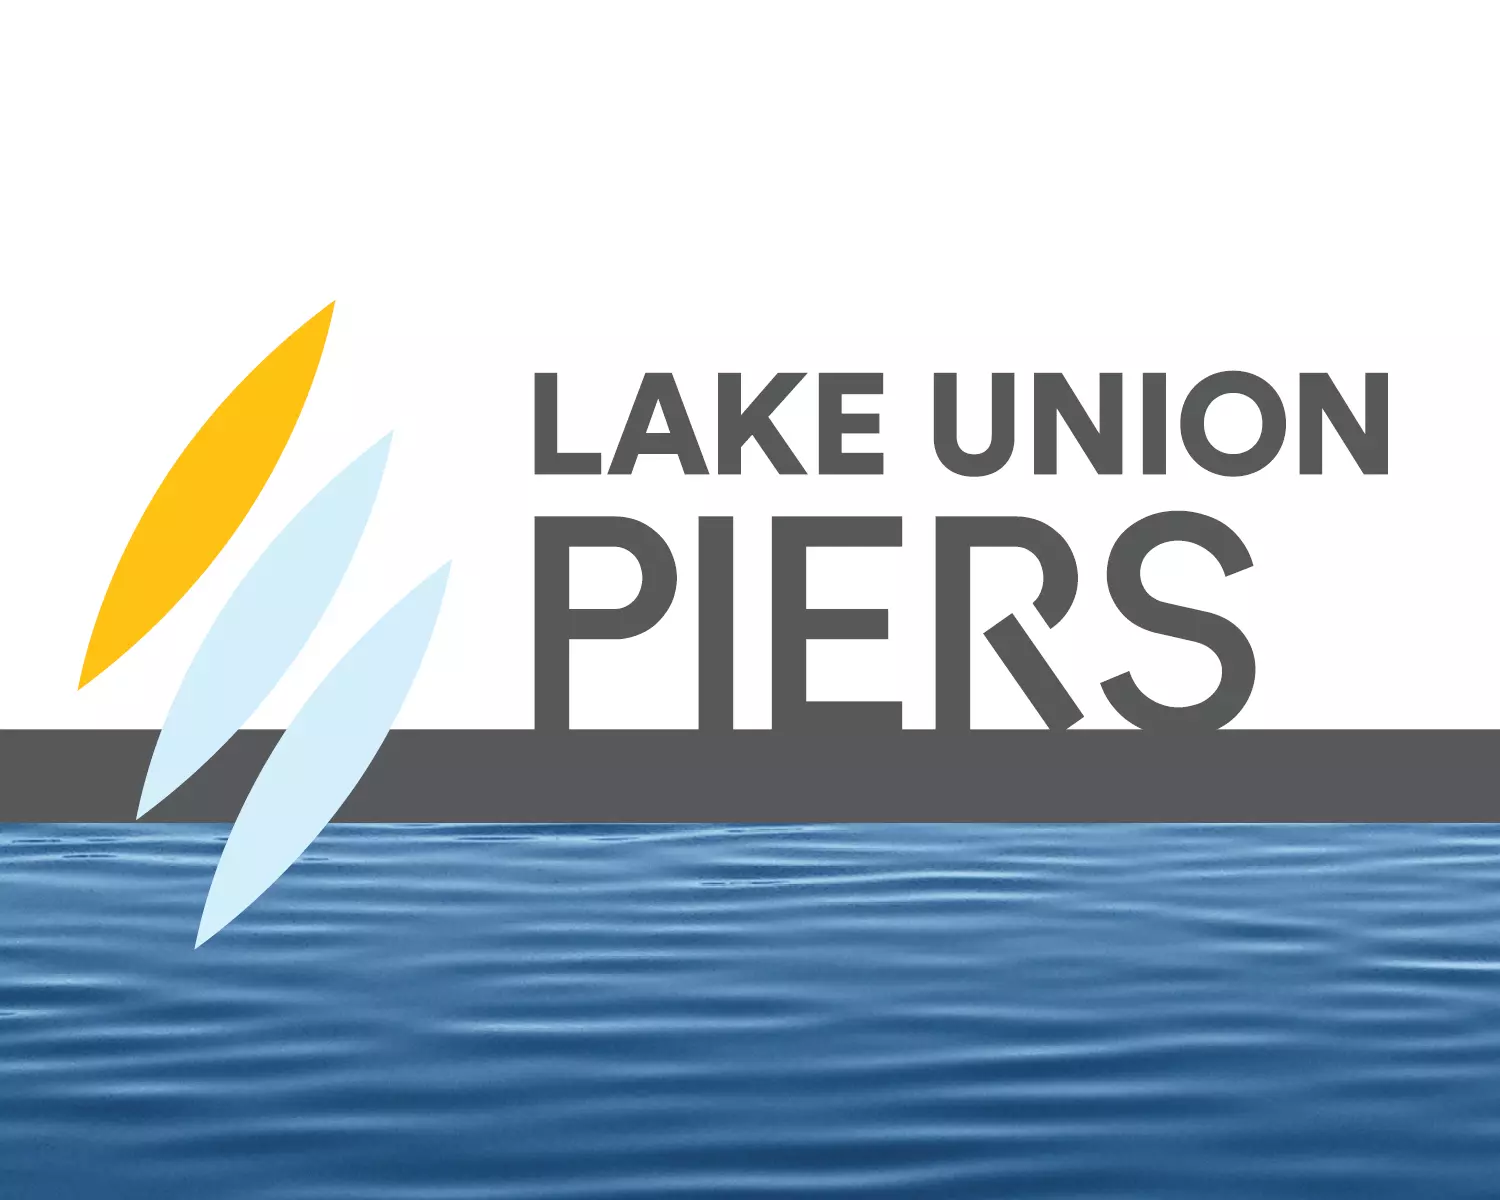 Lake Union Piers logo with water background